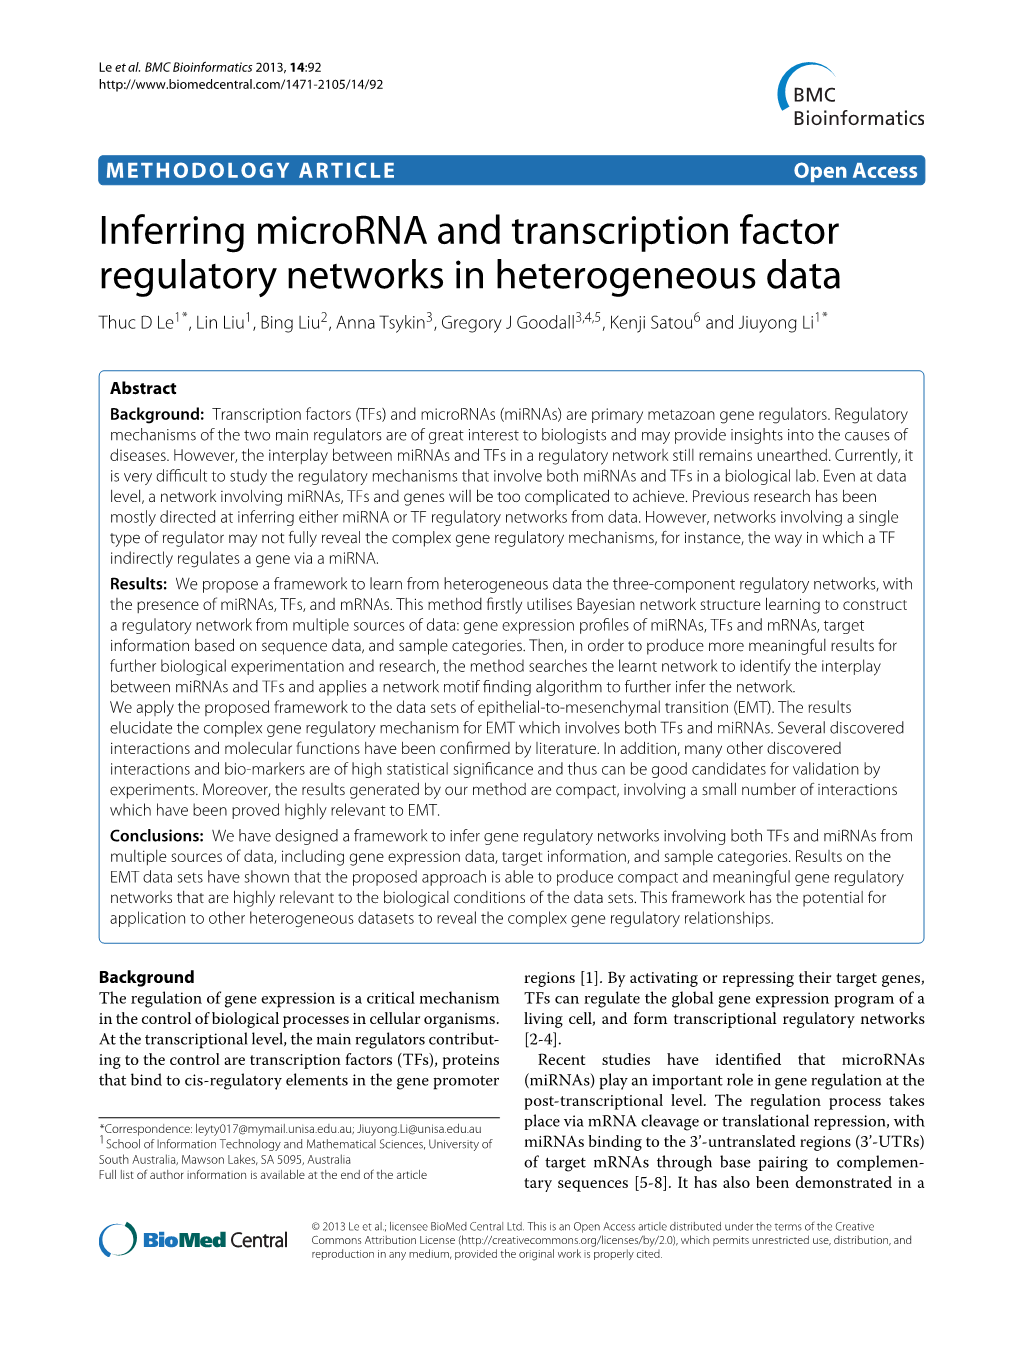 Inferring Microrna and Transcription Factor Regulatory Networks In